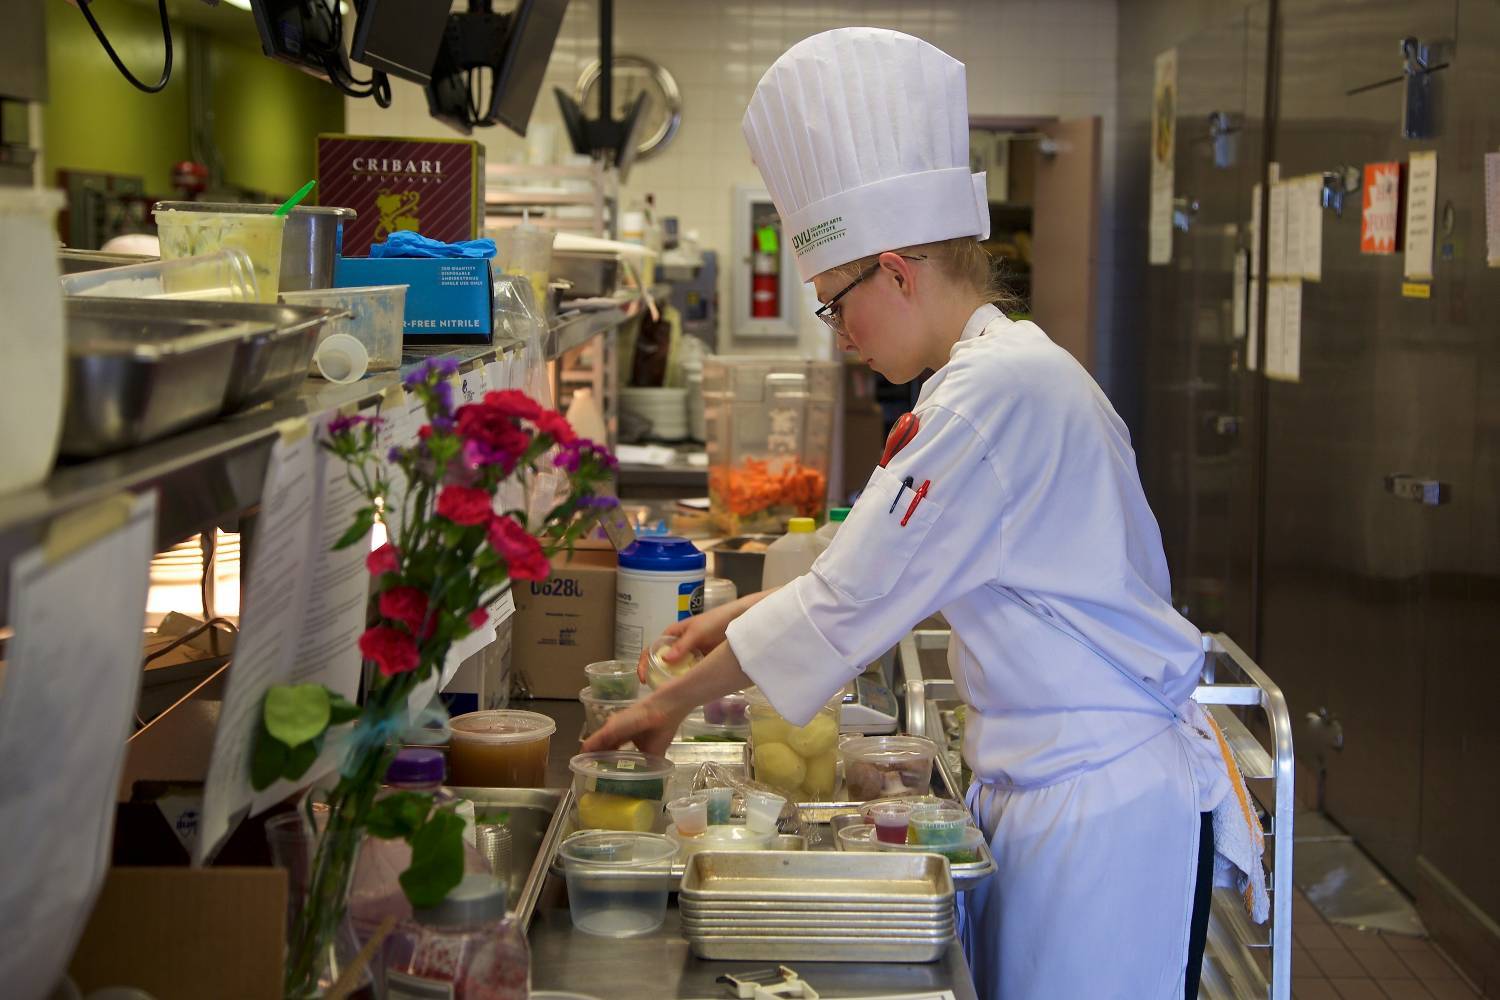 Culinary Arts Student Qualifies for World Championships